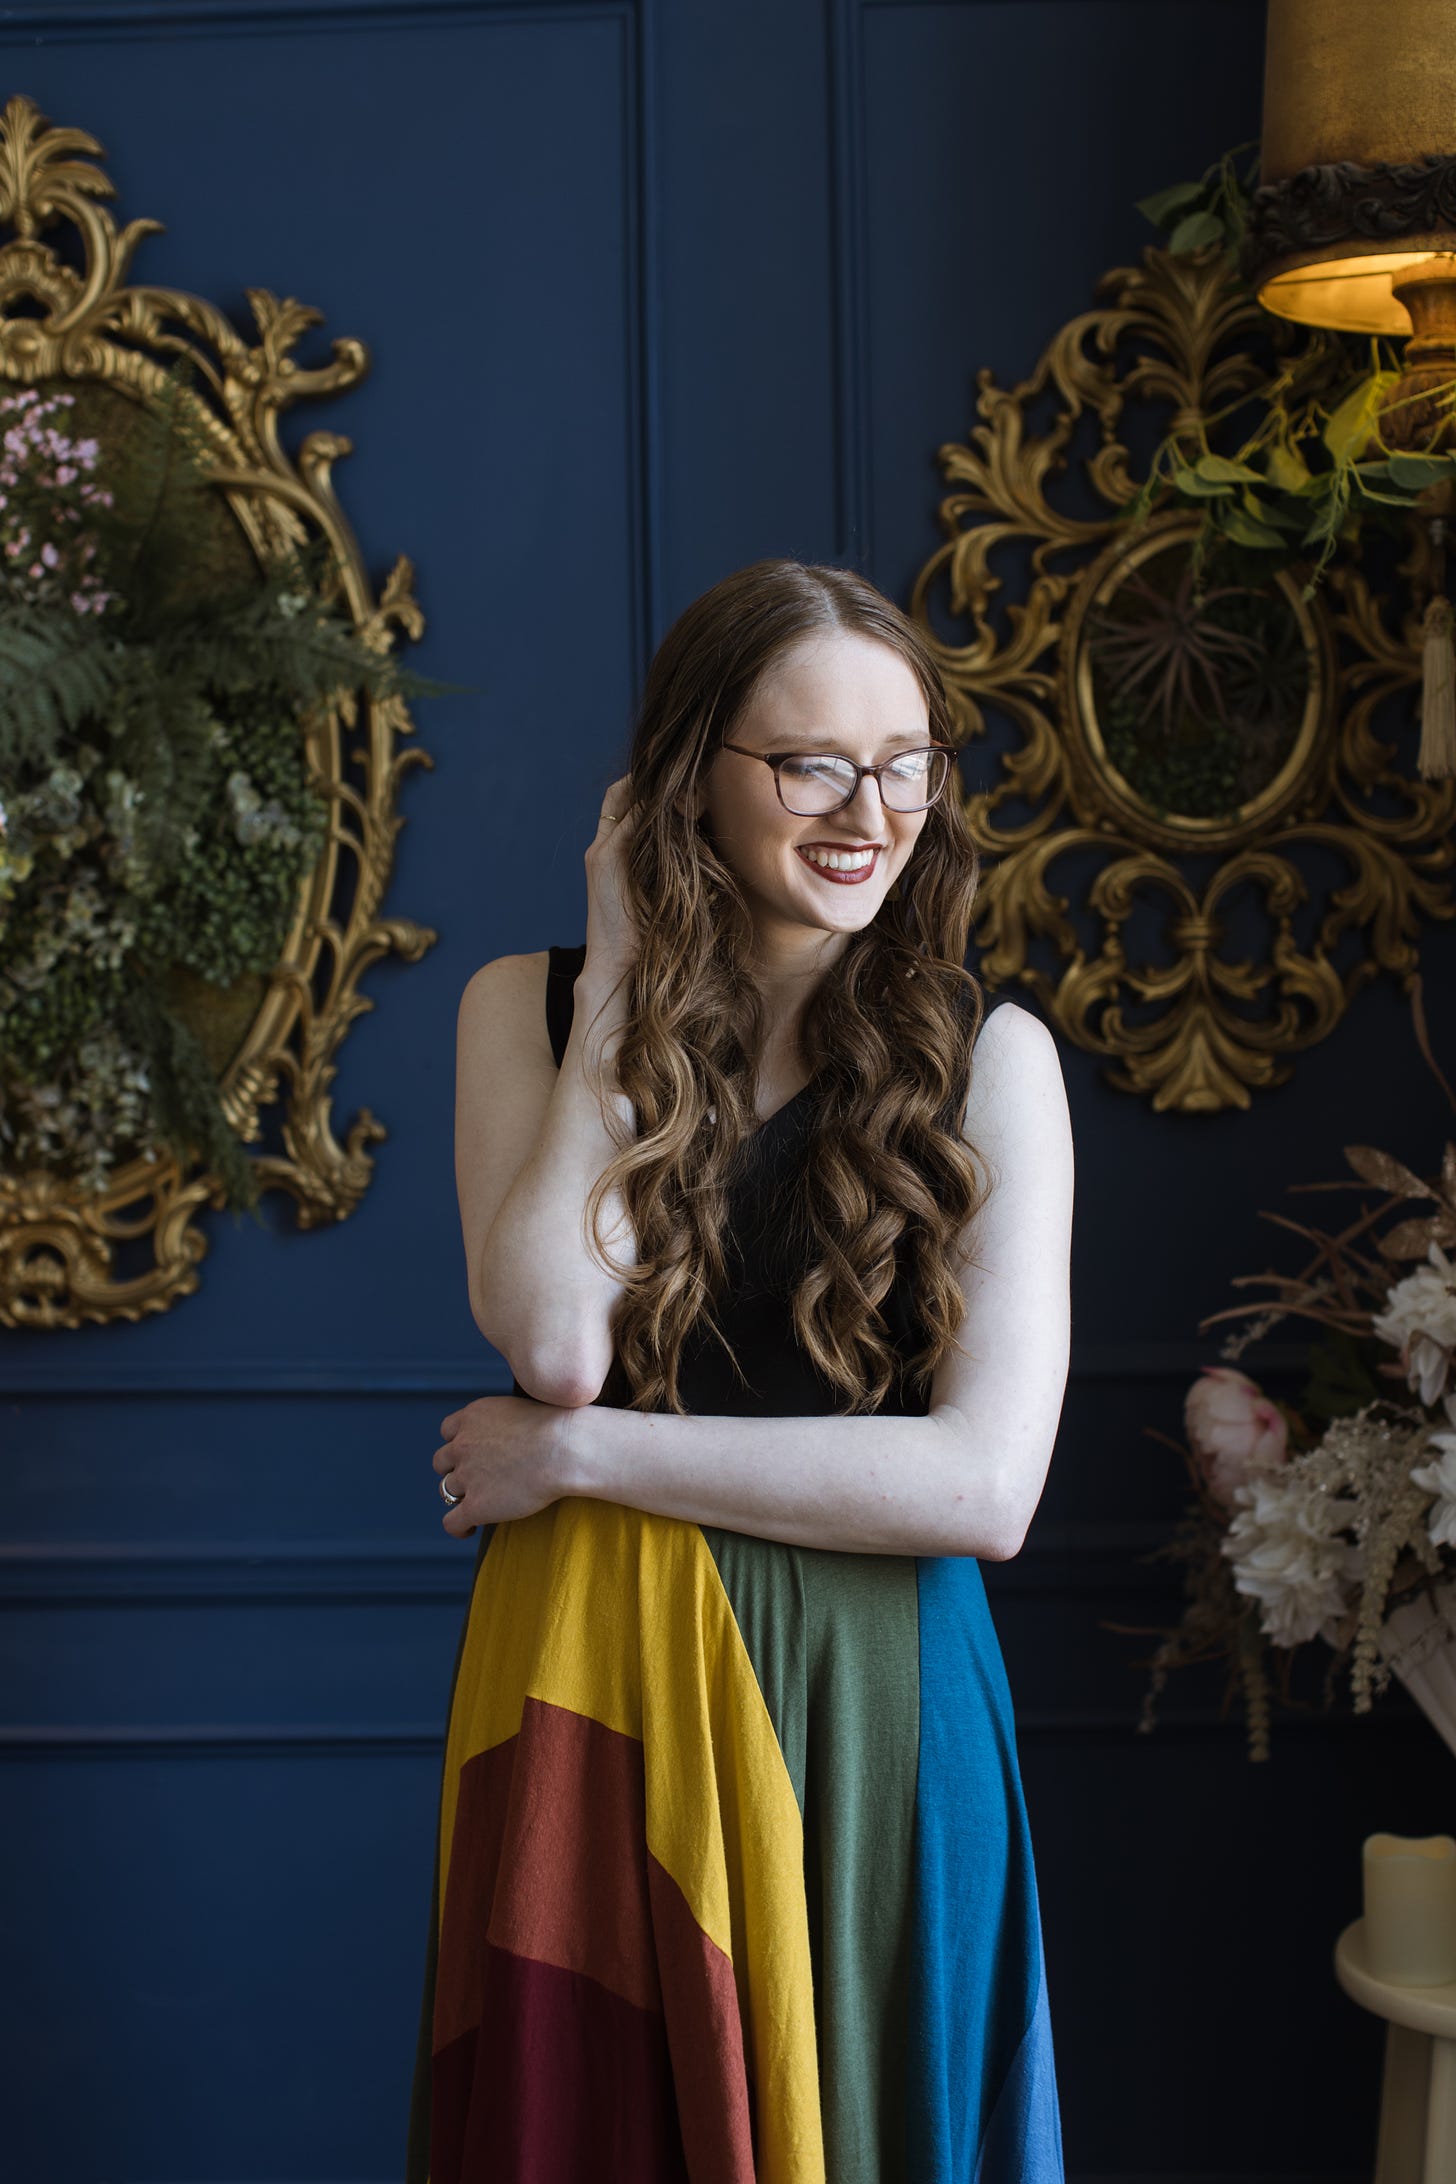 Kandi Zeller (she/her), a white woman with long, reddish brown hair and glasses, smiles and looks down. She is wearing a rainbow dress and is in front of blue backdrop with lots of green foliage.